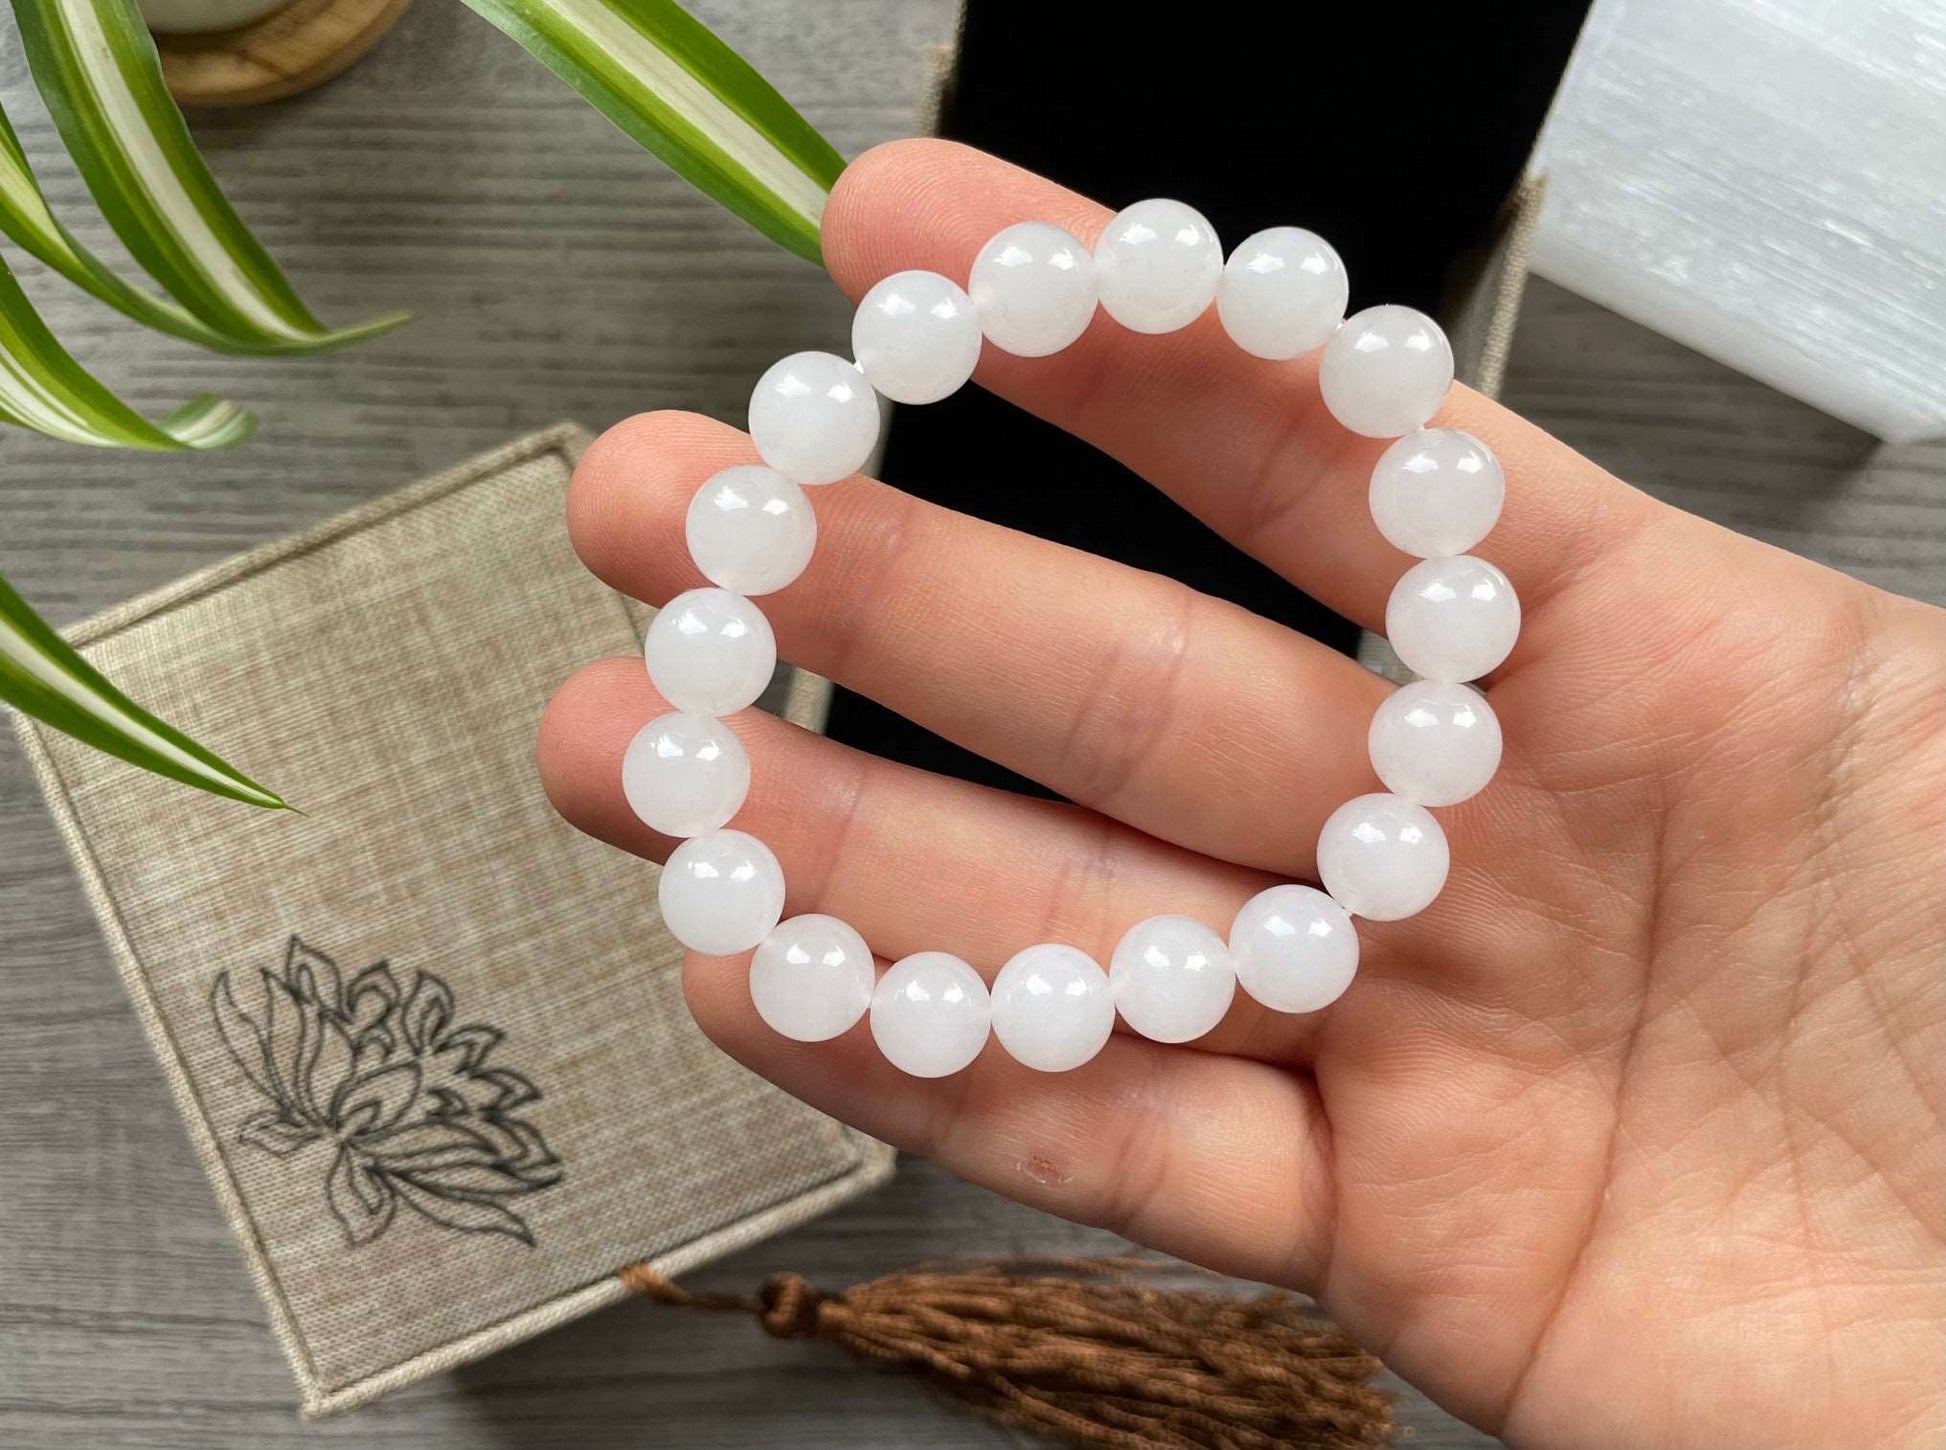 Pictured is a genuine, high-quality white jade bead bracelet.